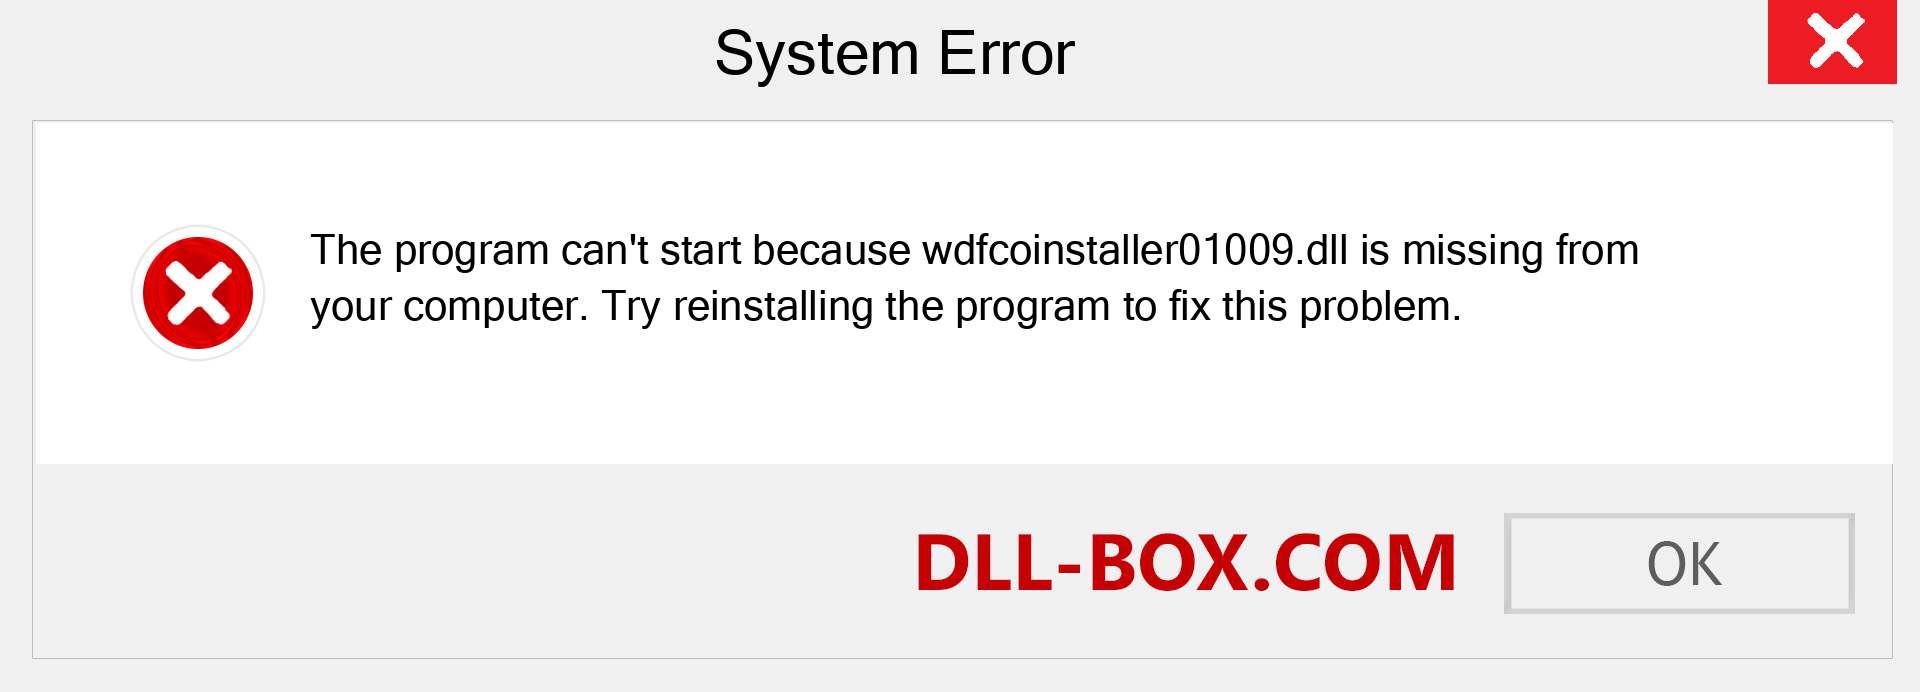  wdfcoinstaller01009.dll file is missing?. Download for Windows 7, 8, 10 - Fix  wdfcoinstaller01009 dll Missing Error on Windows, photos, images